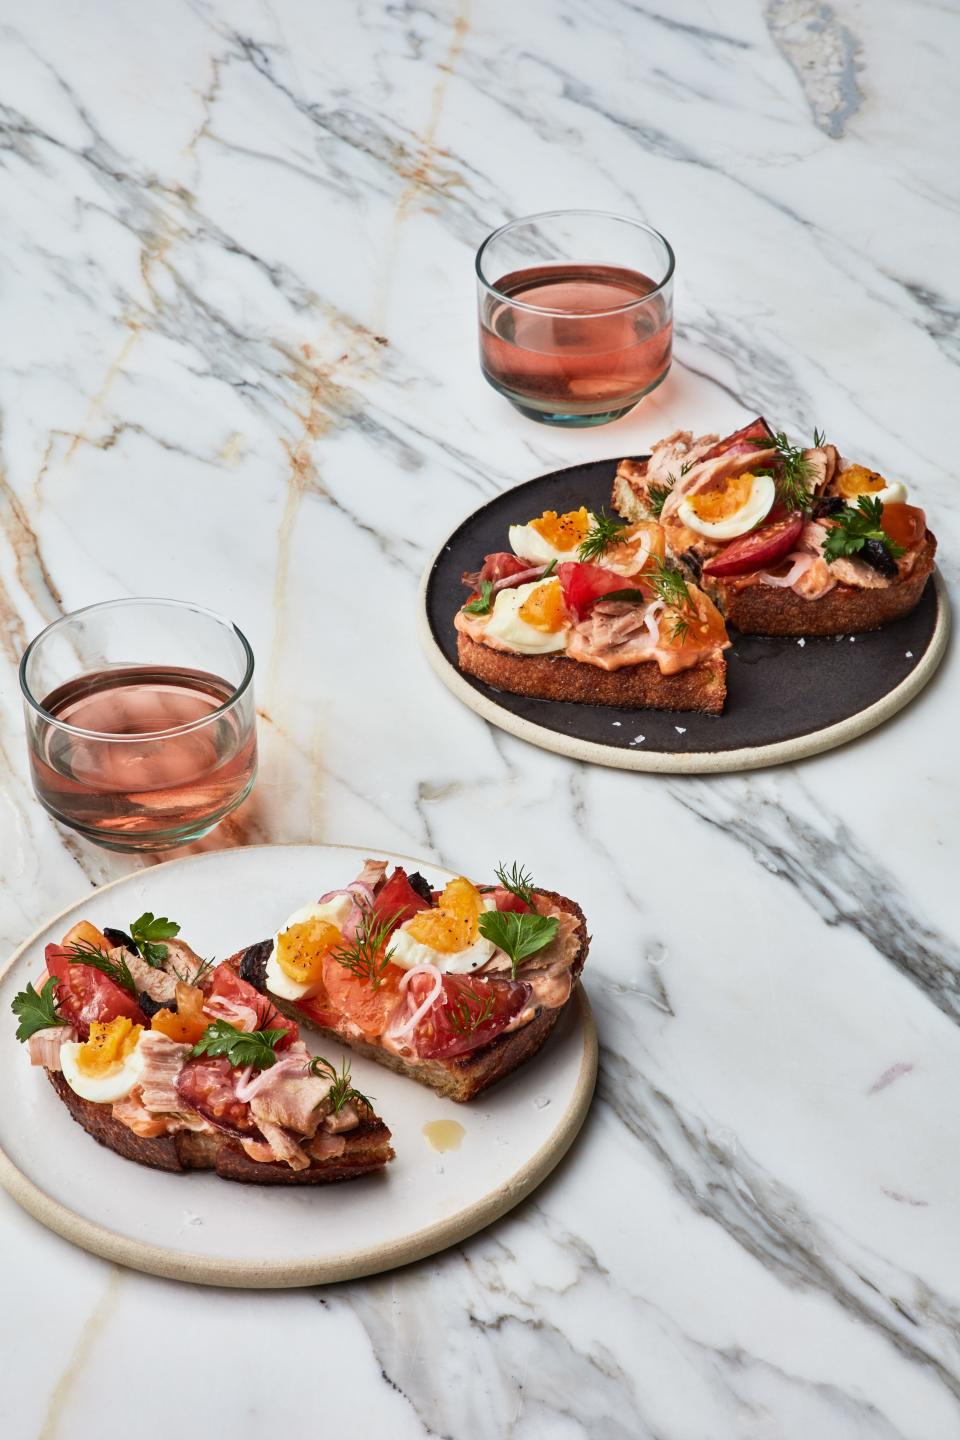 It’s that good. But also, bring some home, because we’re making niçoise toast with it.